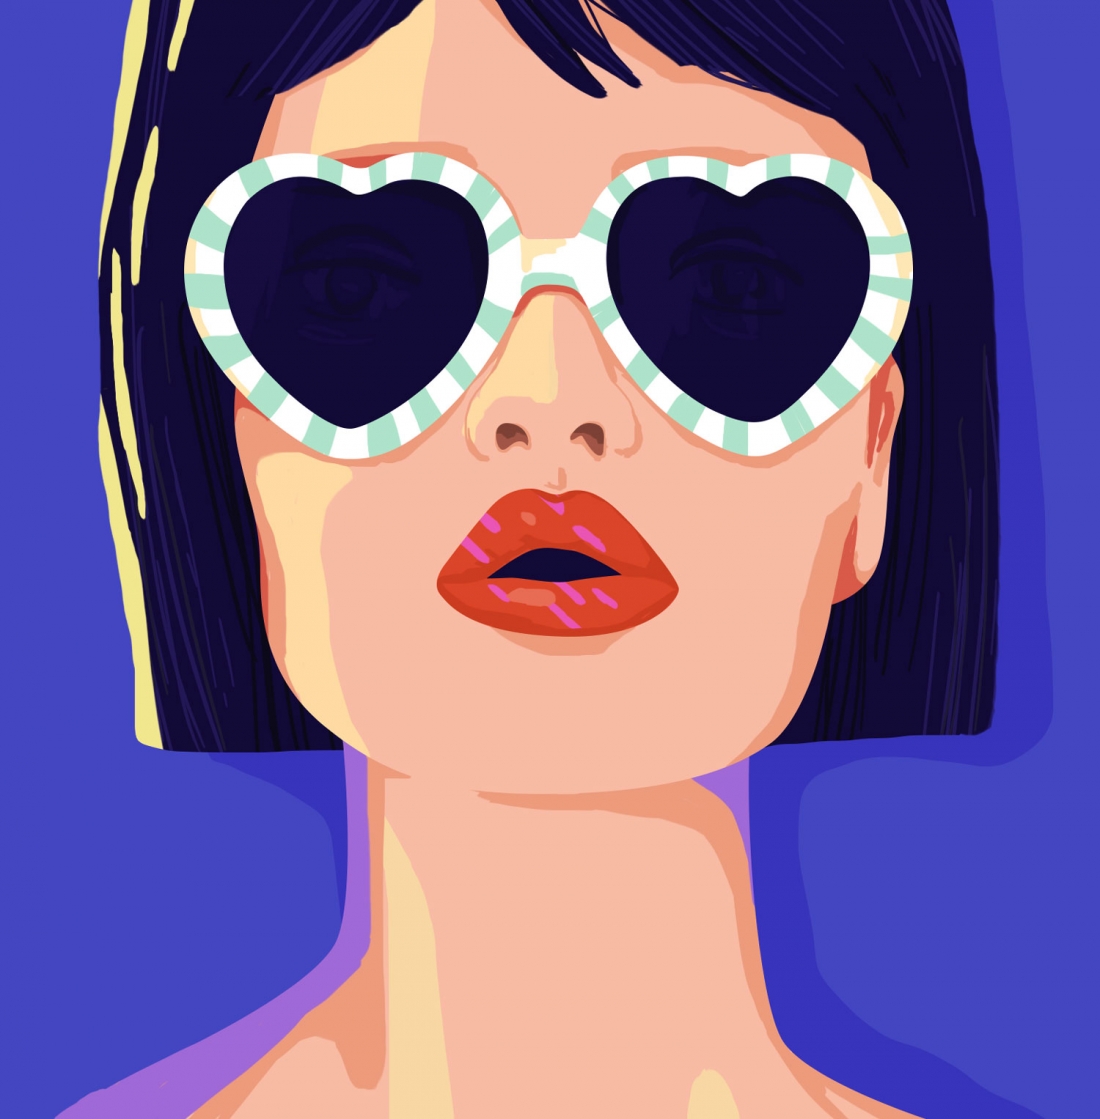 Who Run The World Colourful Portraits Of Girls By Illustrator Petra Eriksson Creative Boom